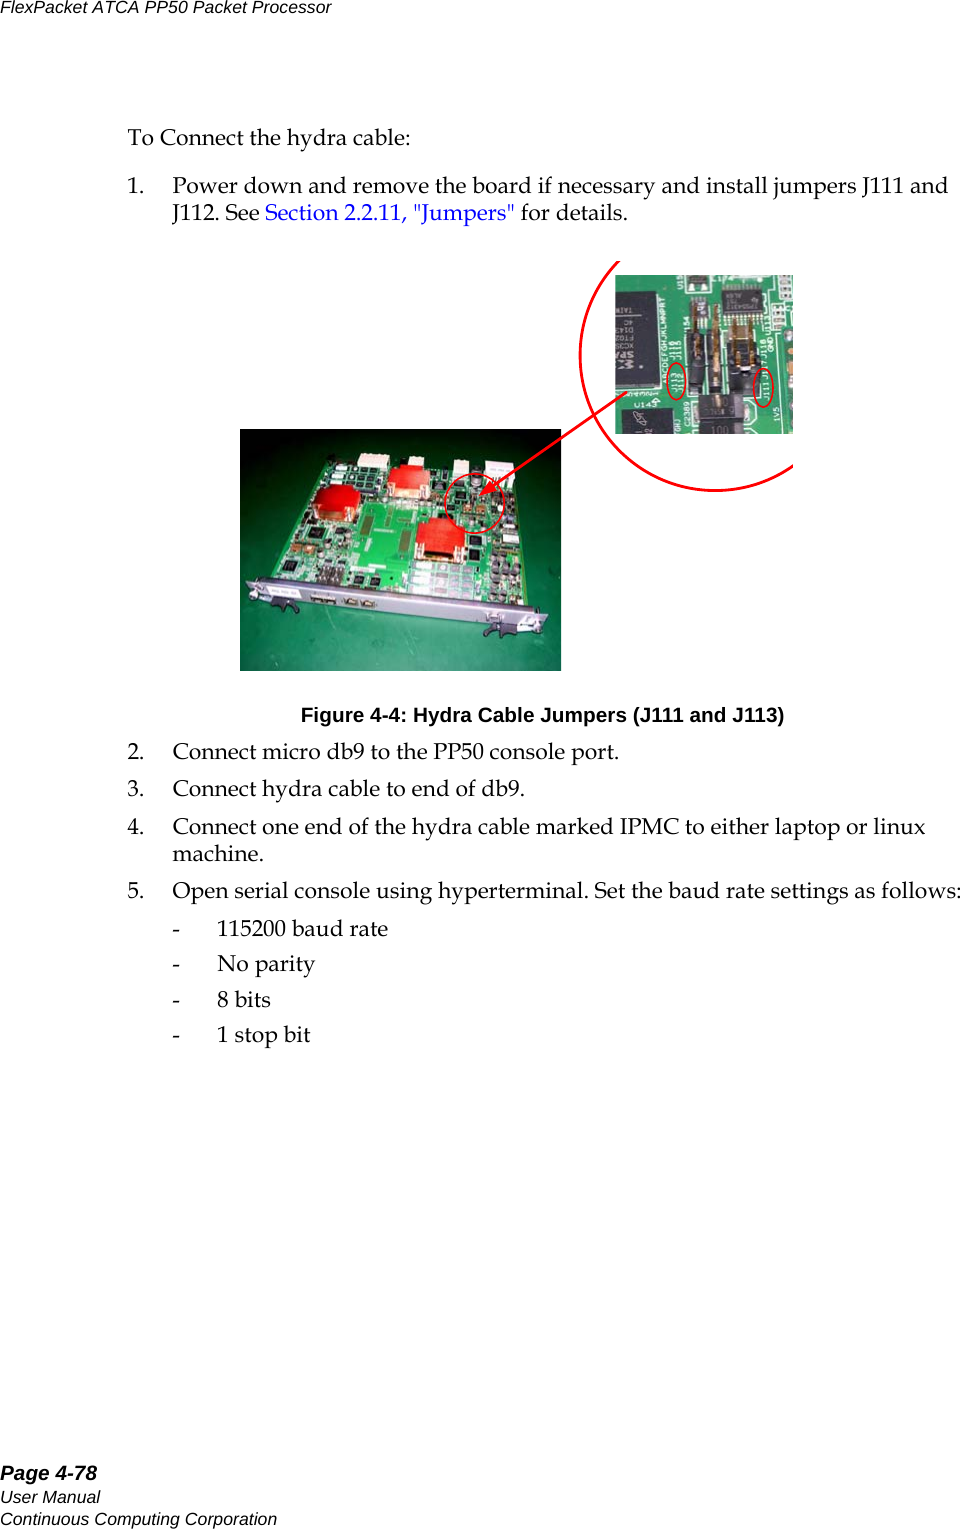 Page 4-78User ManualContinuous Computing CorporationFlexPacket ATCA PP50 Packet Processor     PreliminaryTo Connect the hydra cable: 1. Power down and remove the board if necessary and install jumpers J111 and J112. See Section2.2.11, &quot;Jumpers&quot; for details.2. Connect micro db9 to the PP50 console port.3. Connect hydra cable to end of db9.4. Connect one end of the hydra cable marked IPMC to either laptop or linux machine.5. Open serial console using hyperterminal. Set the baud rate settings as follows:- 115200 baud rate-No parity-8 bits-1 stop bitFigure 4-4: Hydra Cable Jumpers (J111 and J113)